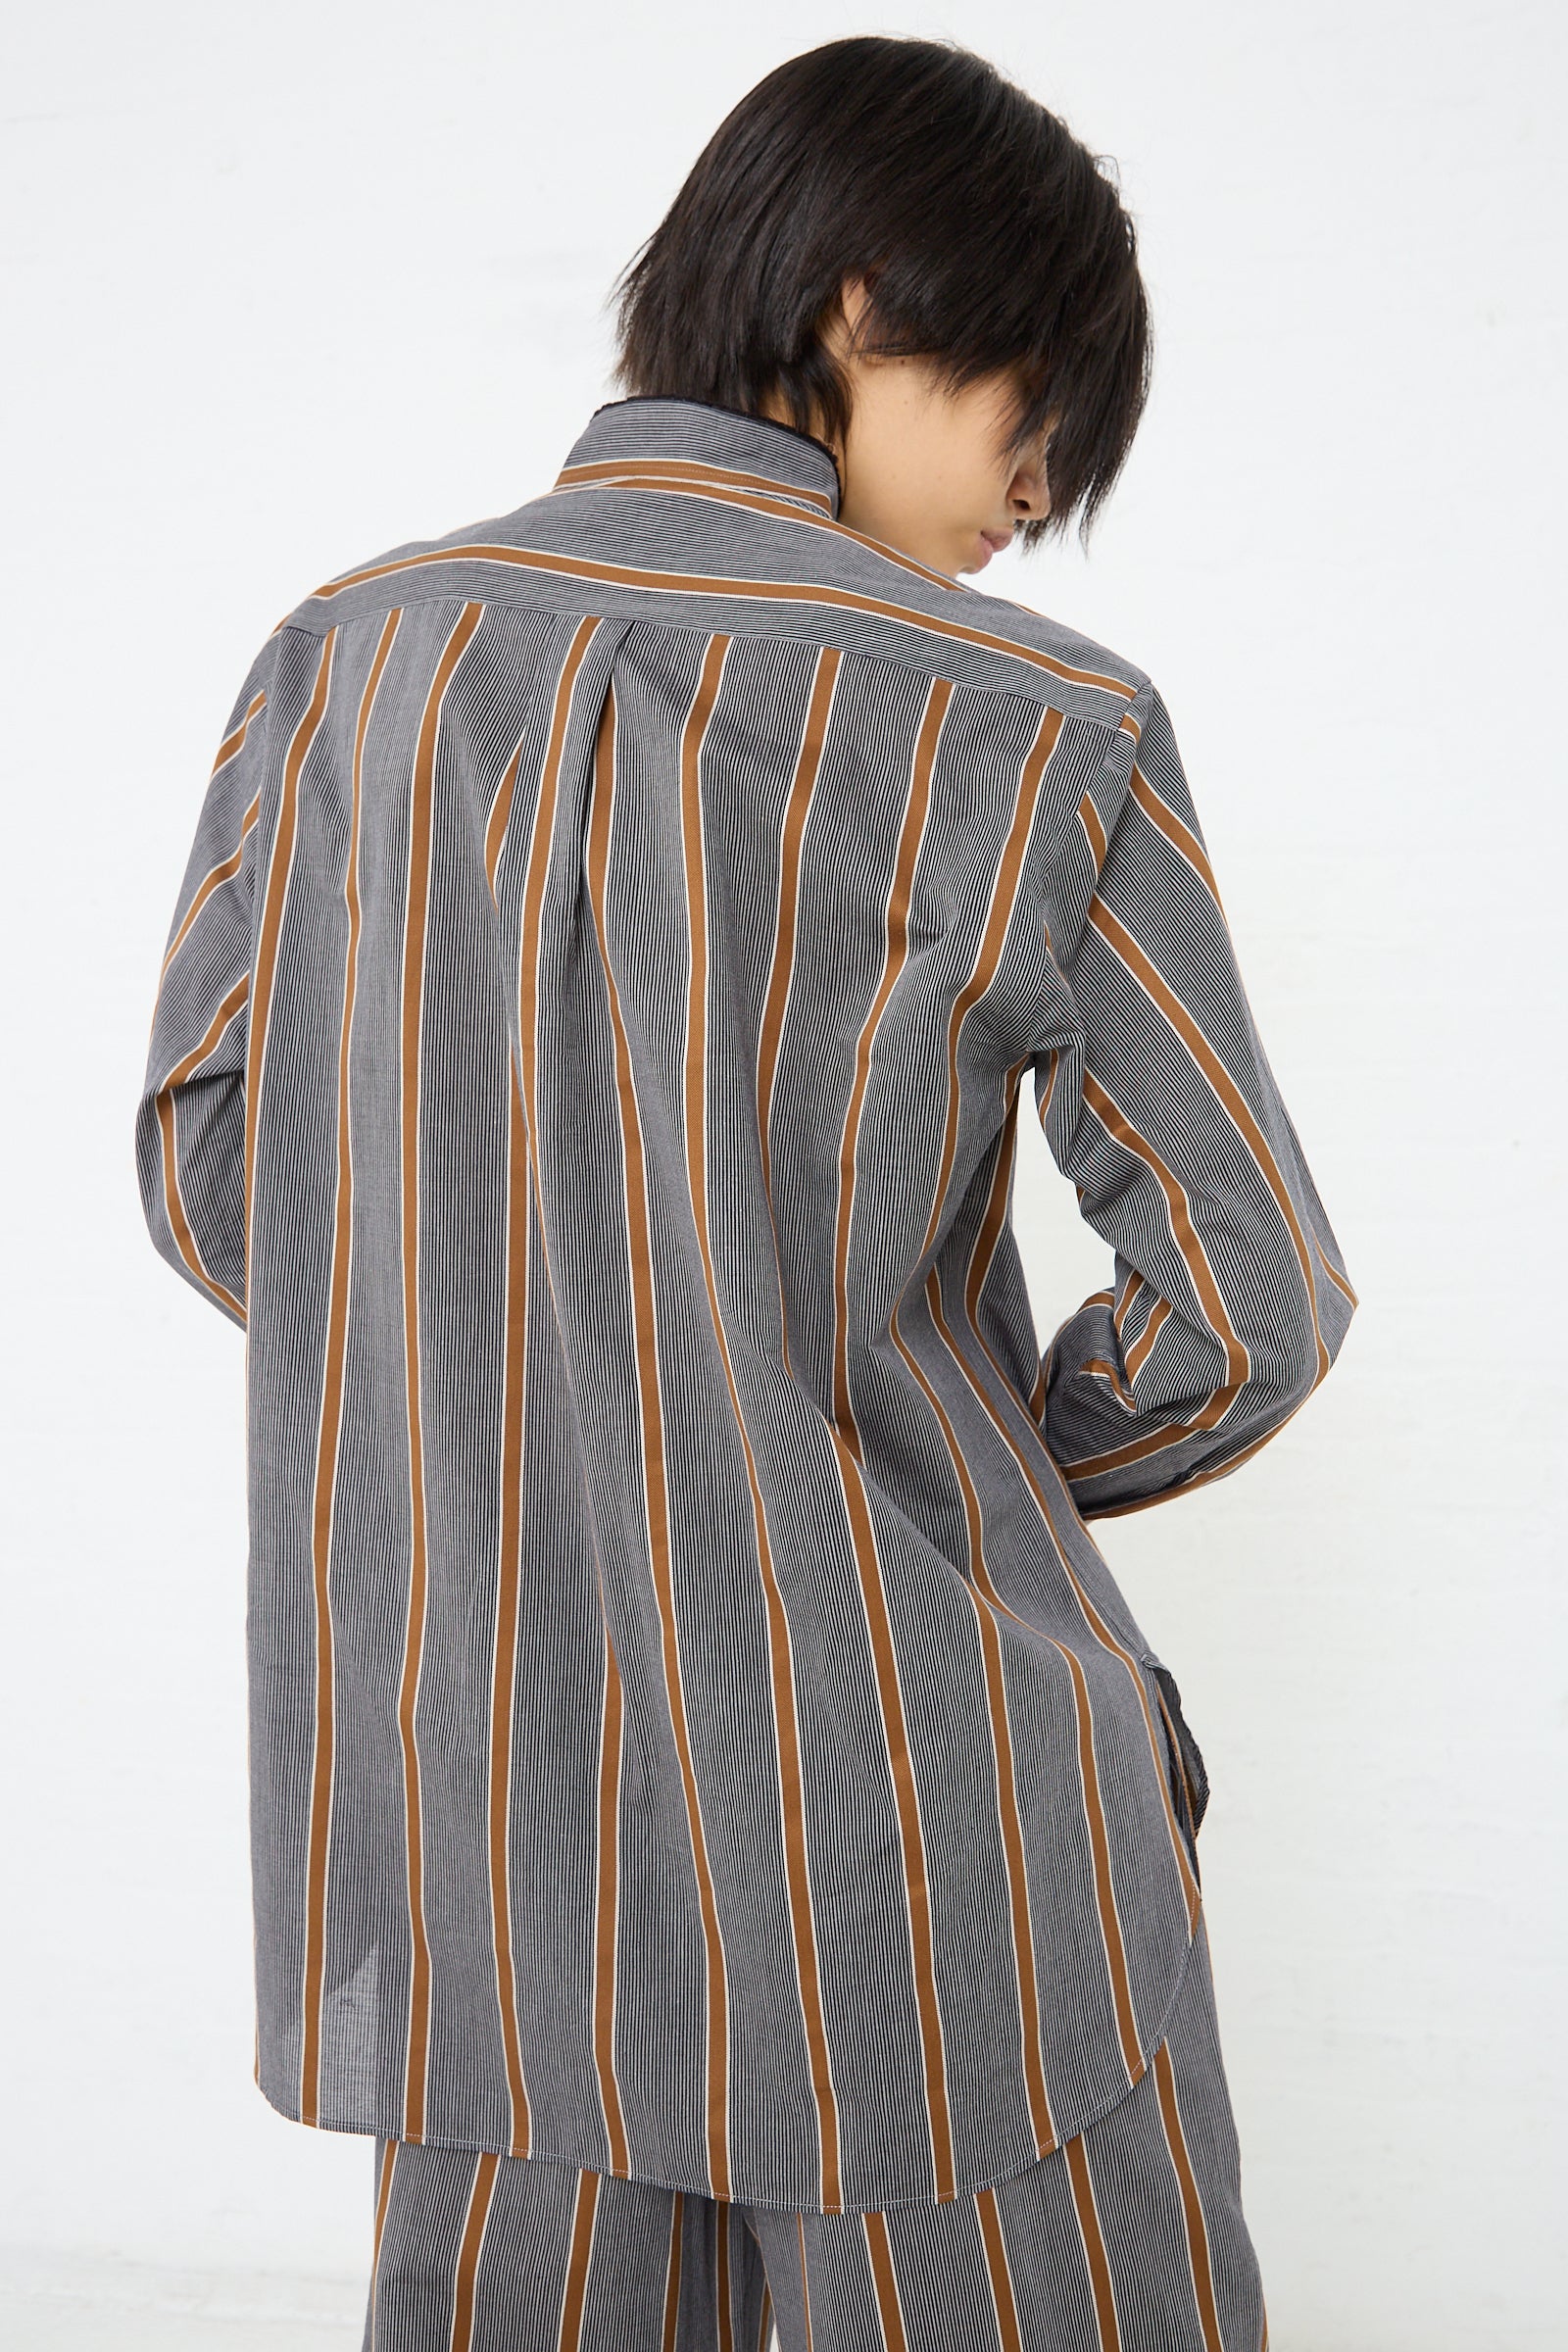 Mao Shirt with Fringed Collar in Striped Black and Noisette